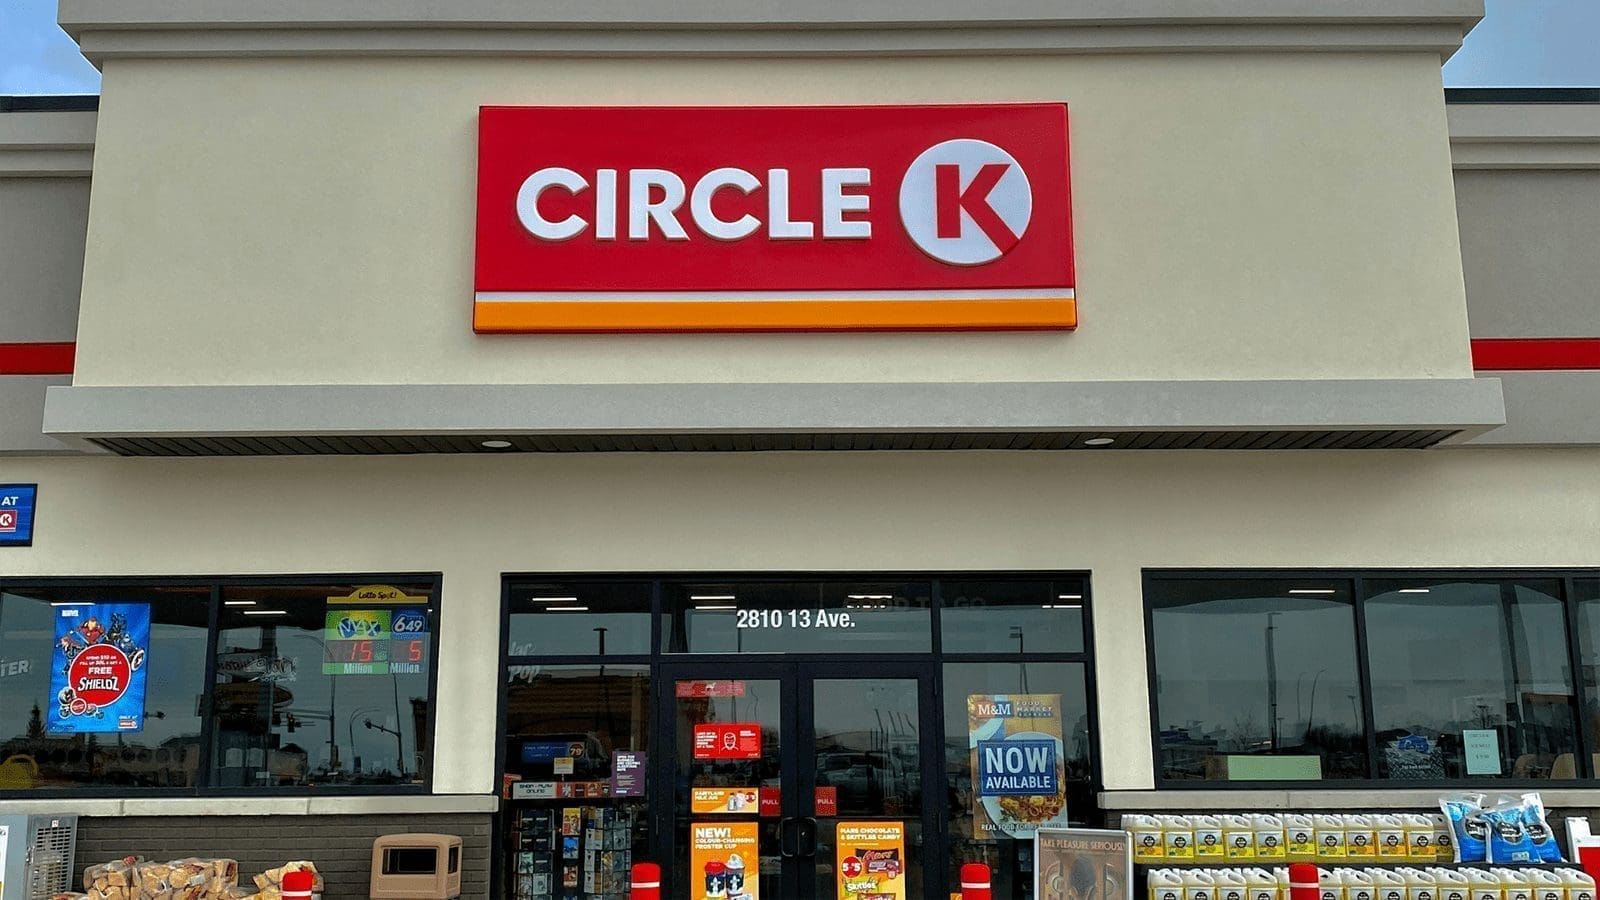 Global convenience retailer Circle K set base in South Africa following franchising agreement with Millat